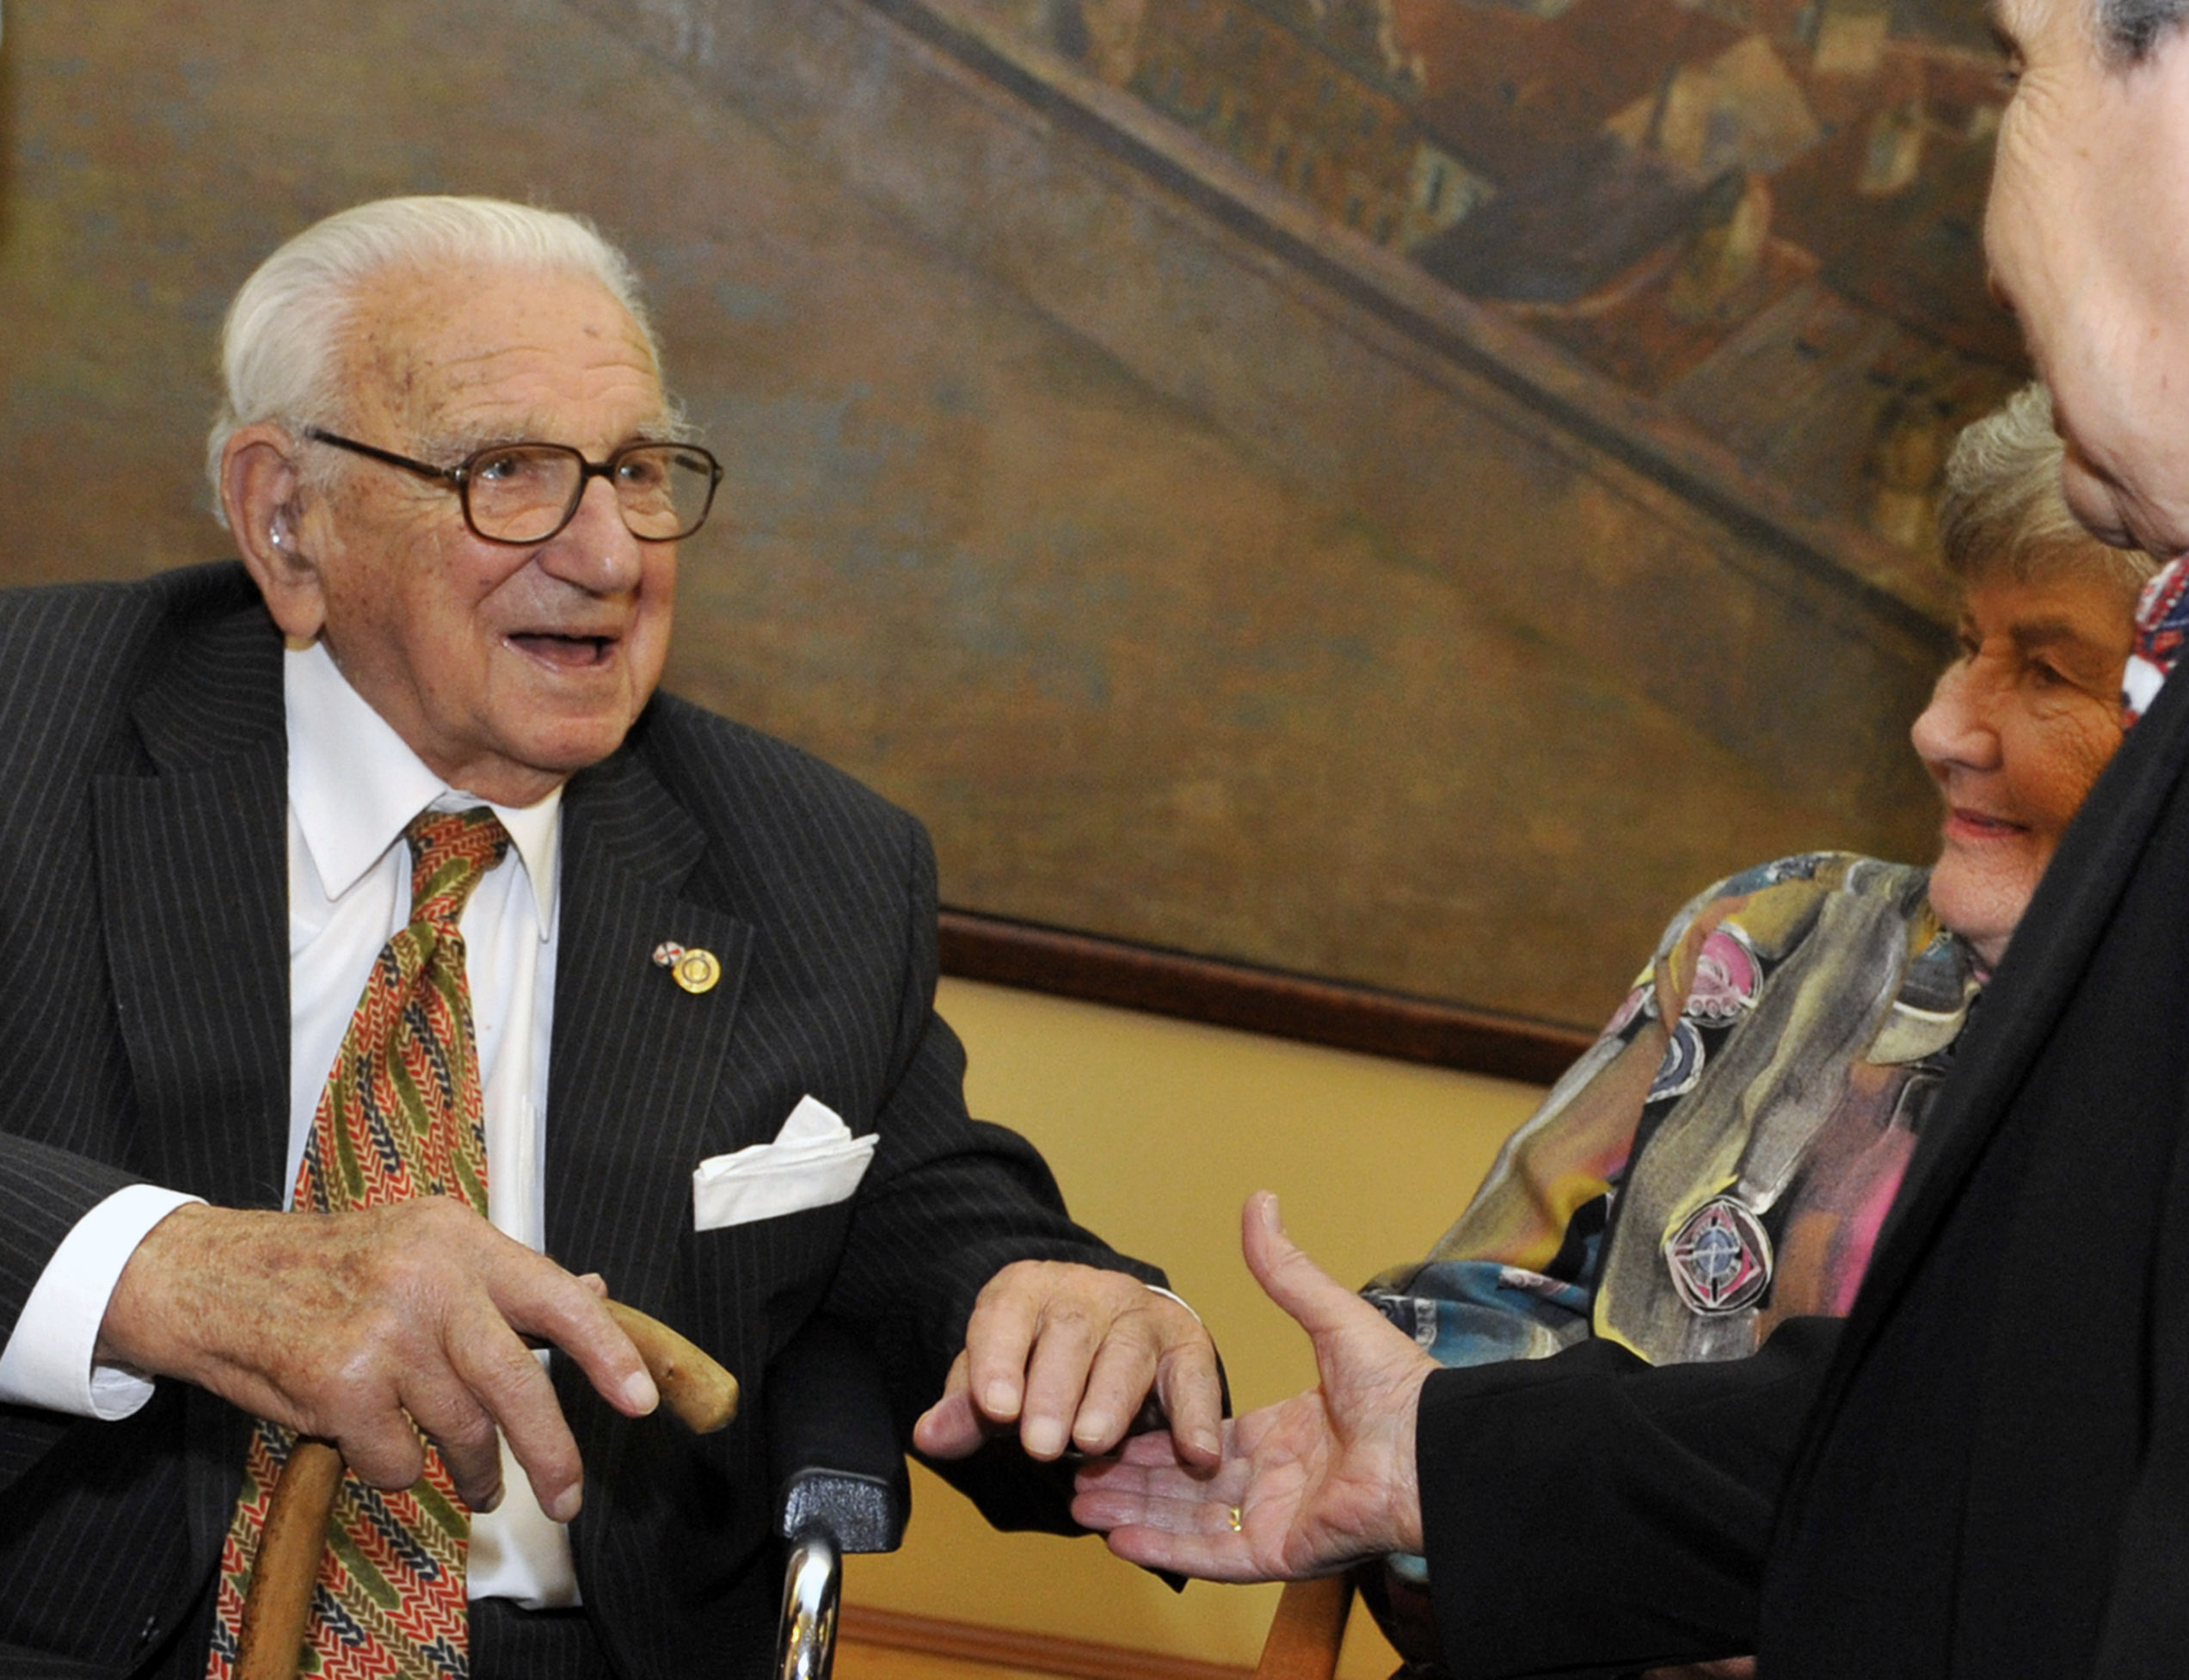 Sir Nicholas Winton, left, who had organized the rescue of 669 mainly Jewish children by train from Prague in 1939, shakes hand with one of them during their meeting with Czech Defense Minister Alexandr Vondra, not seen,  in Prague, Czech Republic, Friday, Jan. 21, 2011. (AP Photo,CTK/Roman Vondrous) **SLOVAKIA OUT**